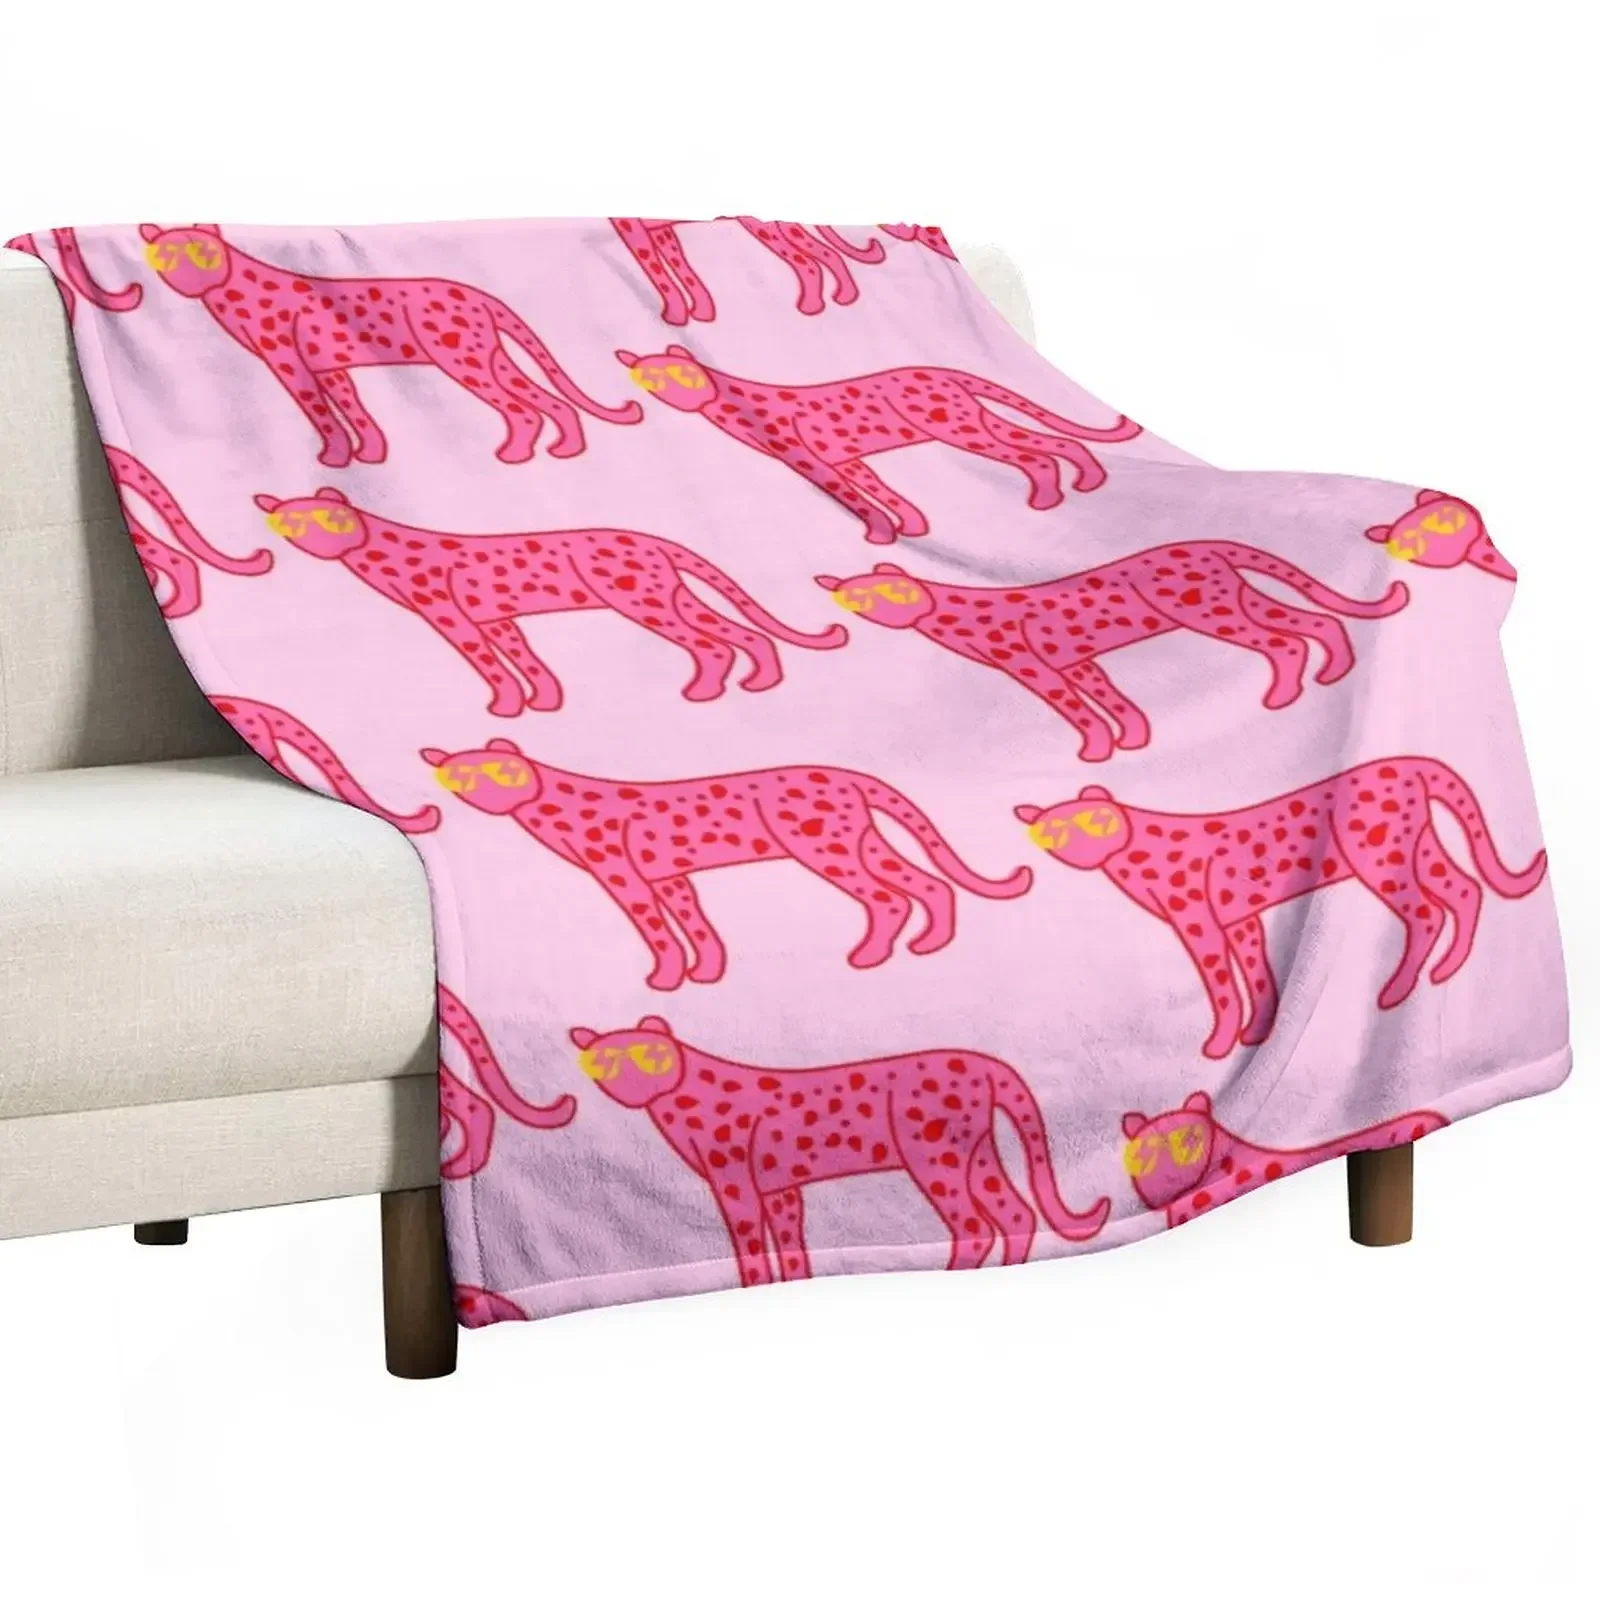 

cheetah xoxo Throw Blanket blankets and throws Blankets For Bed Blankets